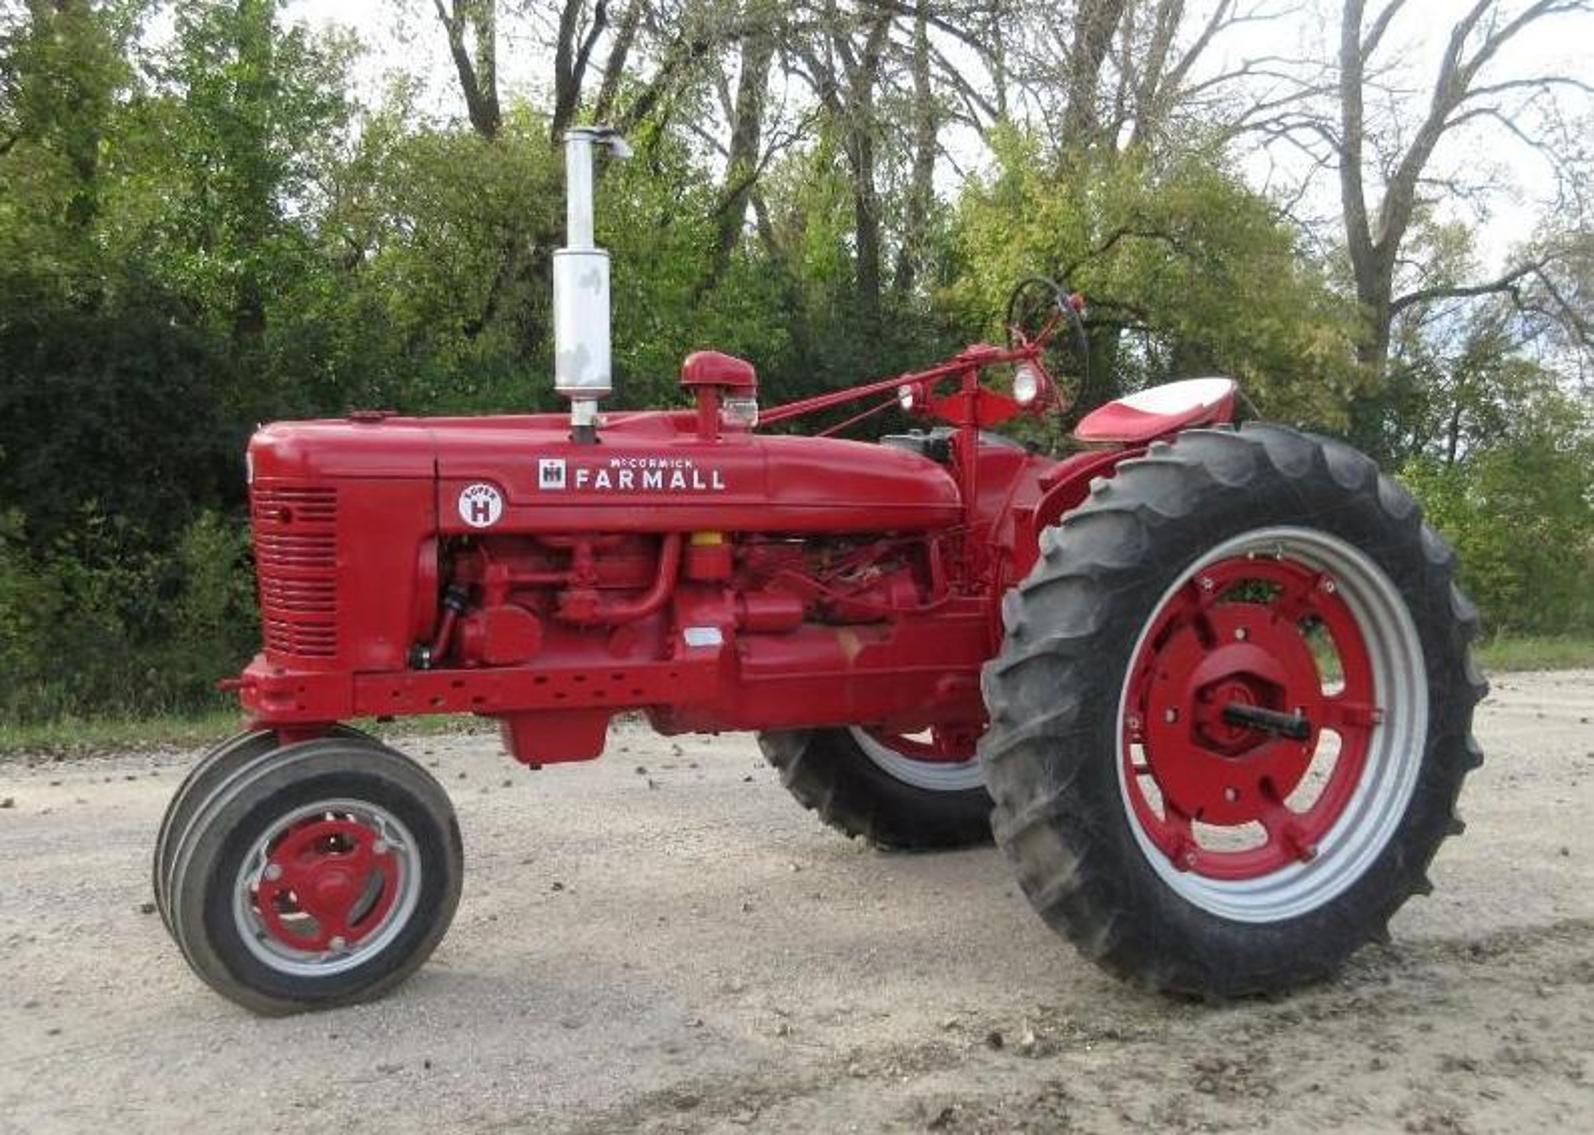 Farm Equipment and More: Paul Ims Estate and Others